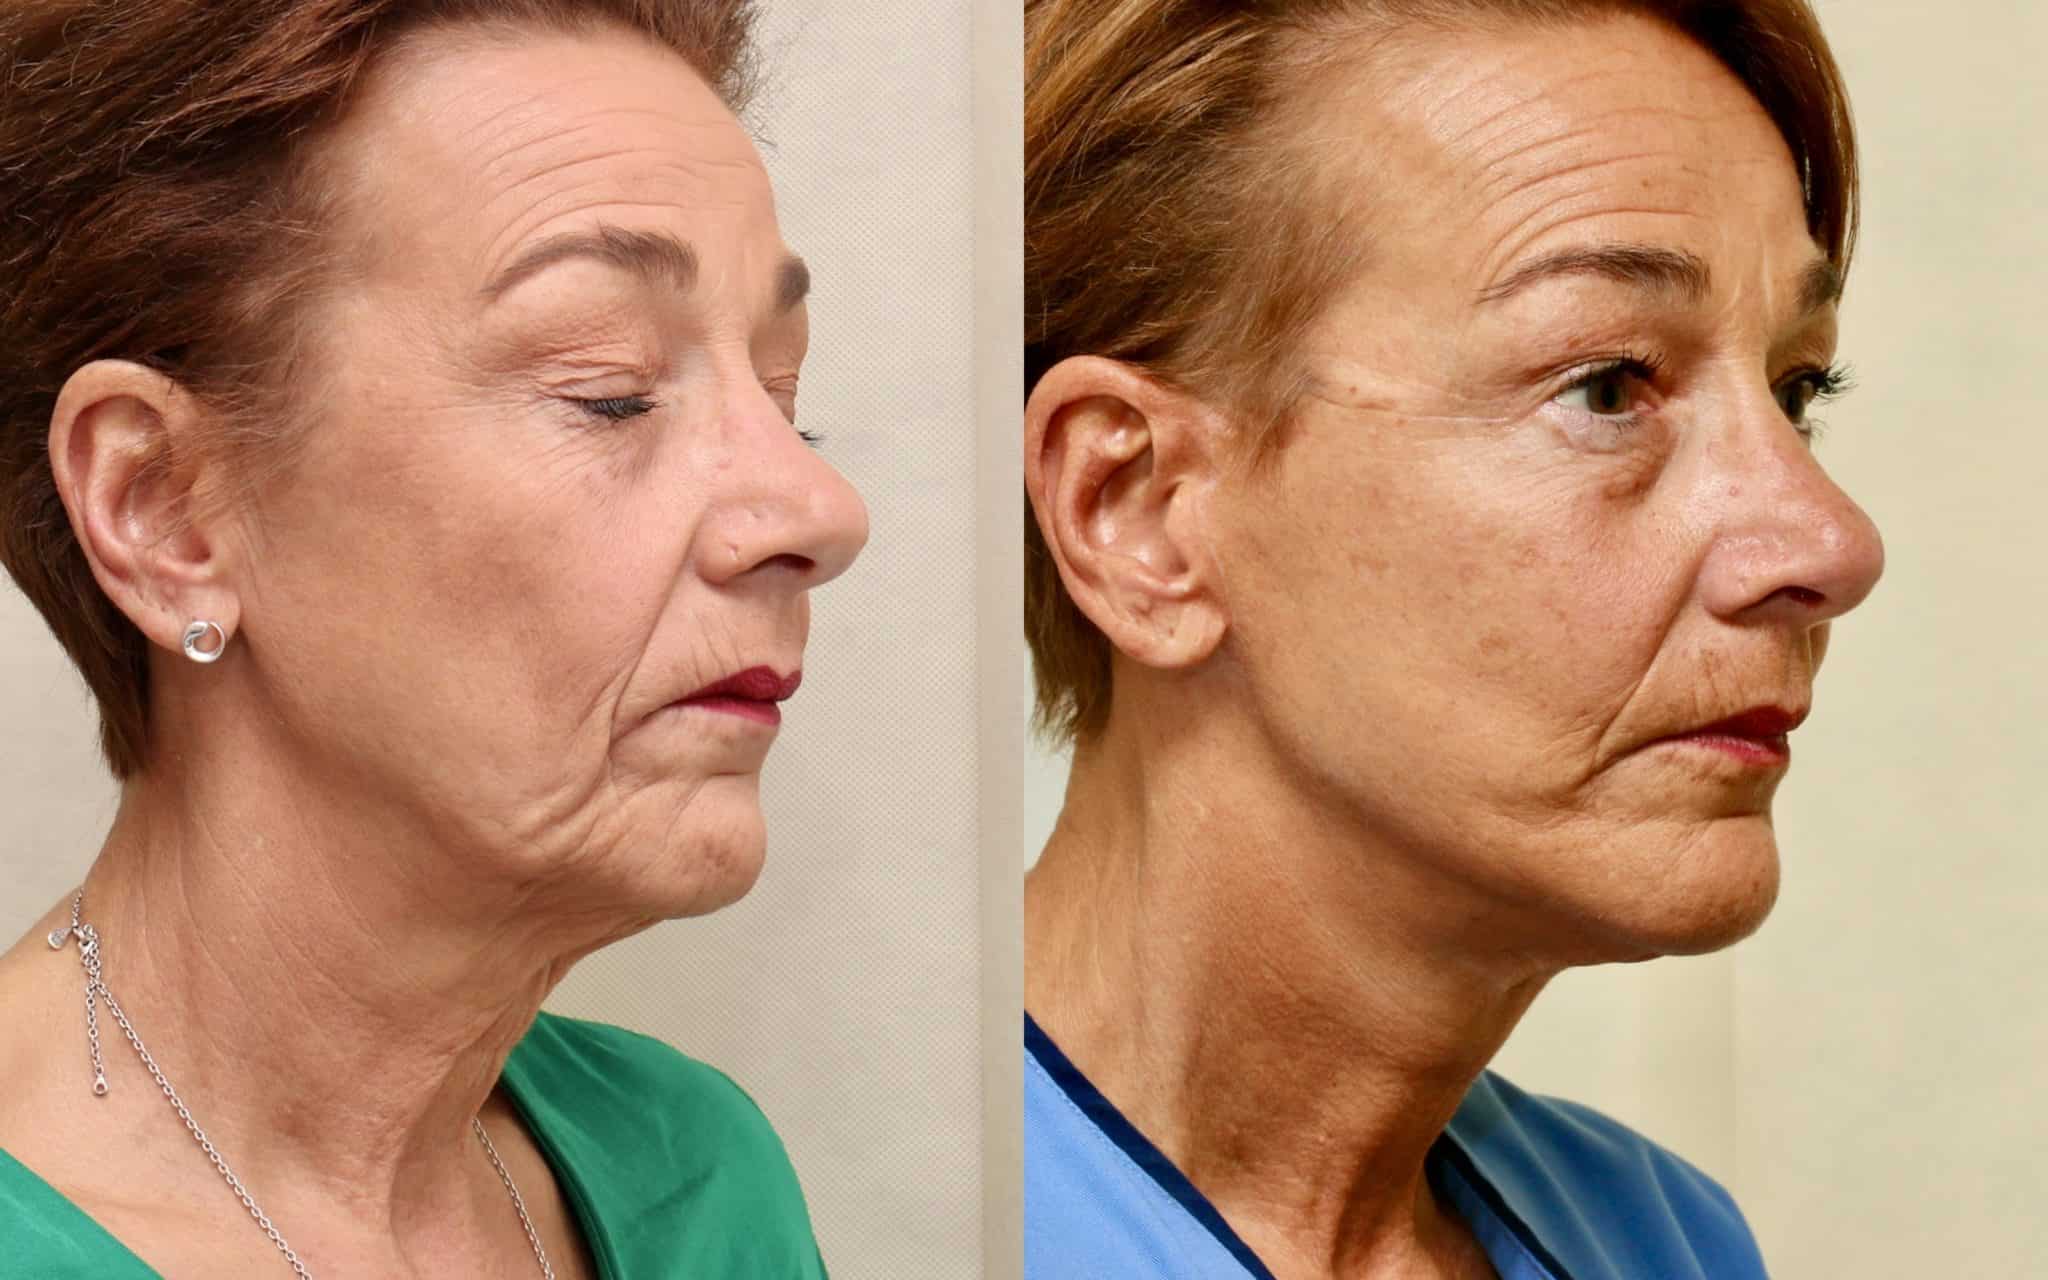 Before and after facelift, 6 days and 6 months post op